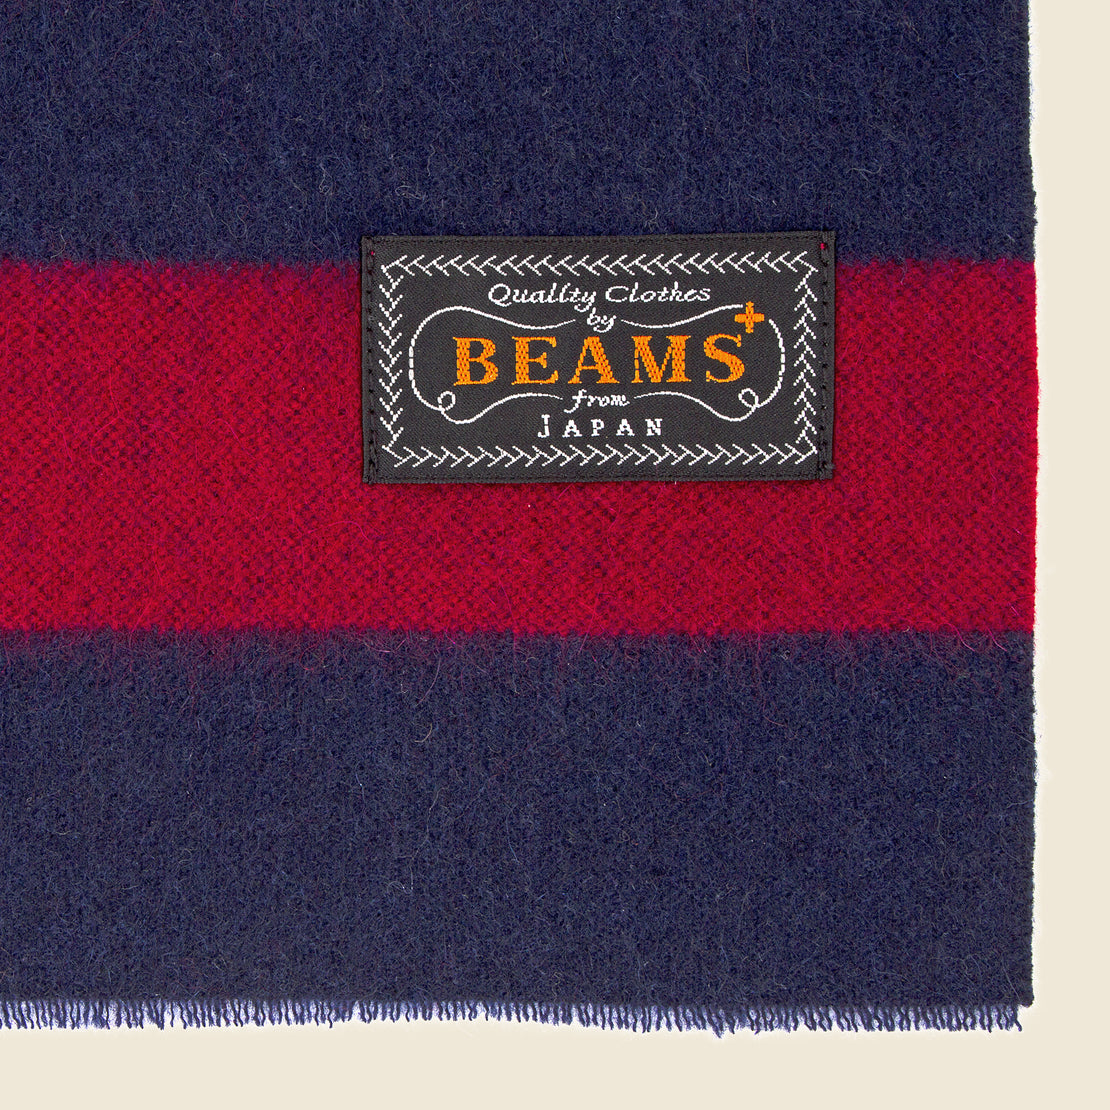 Cashmere Scarf - Navy/Wine Stripe - BEAMS+ - STAG Provisions - Accessories - Scarves